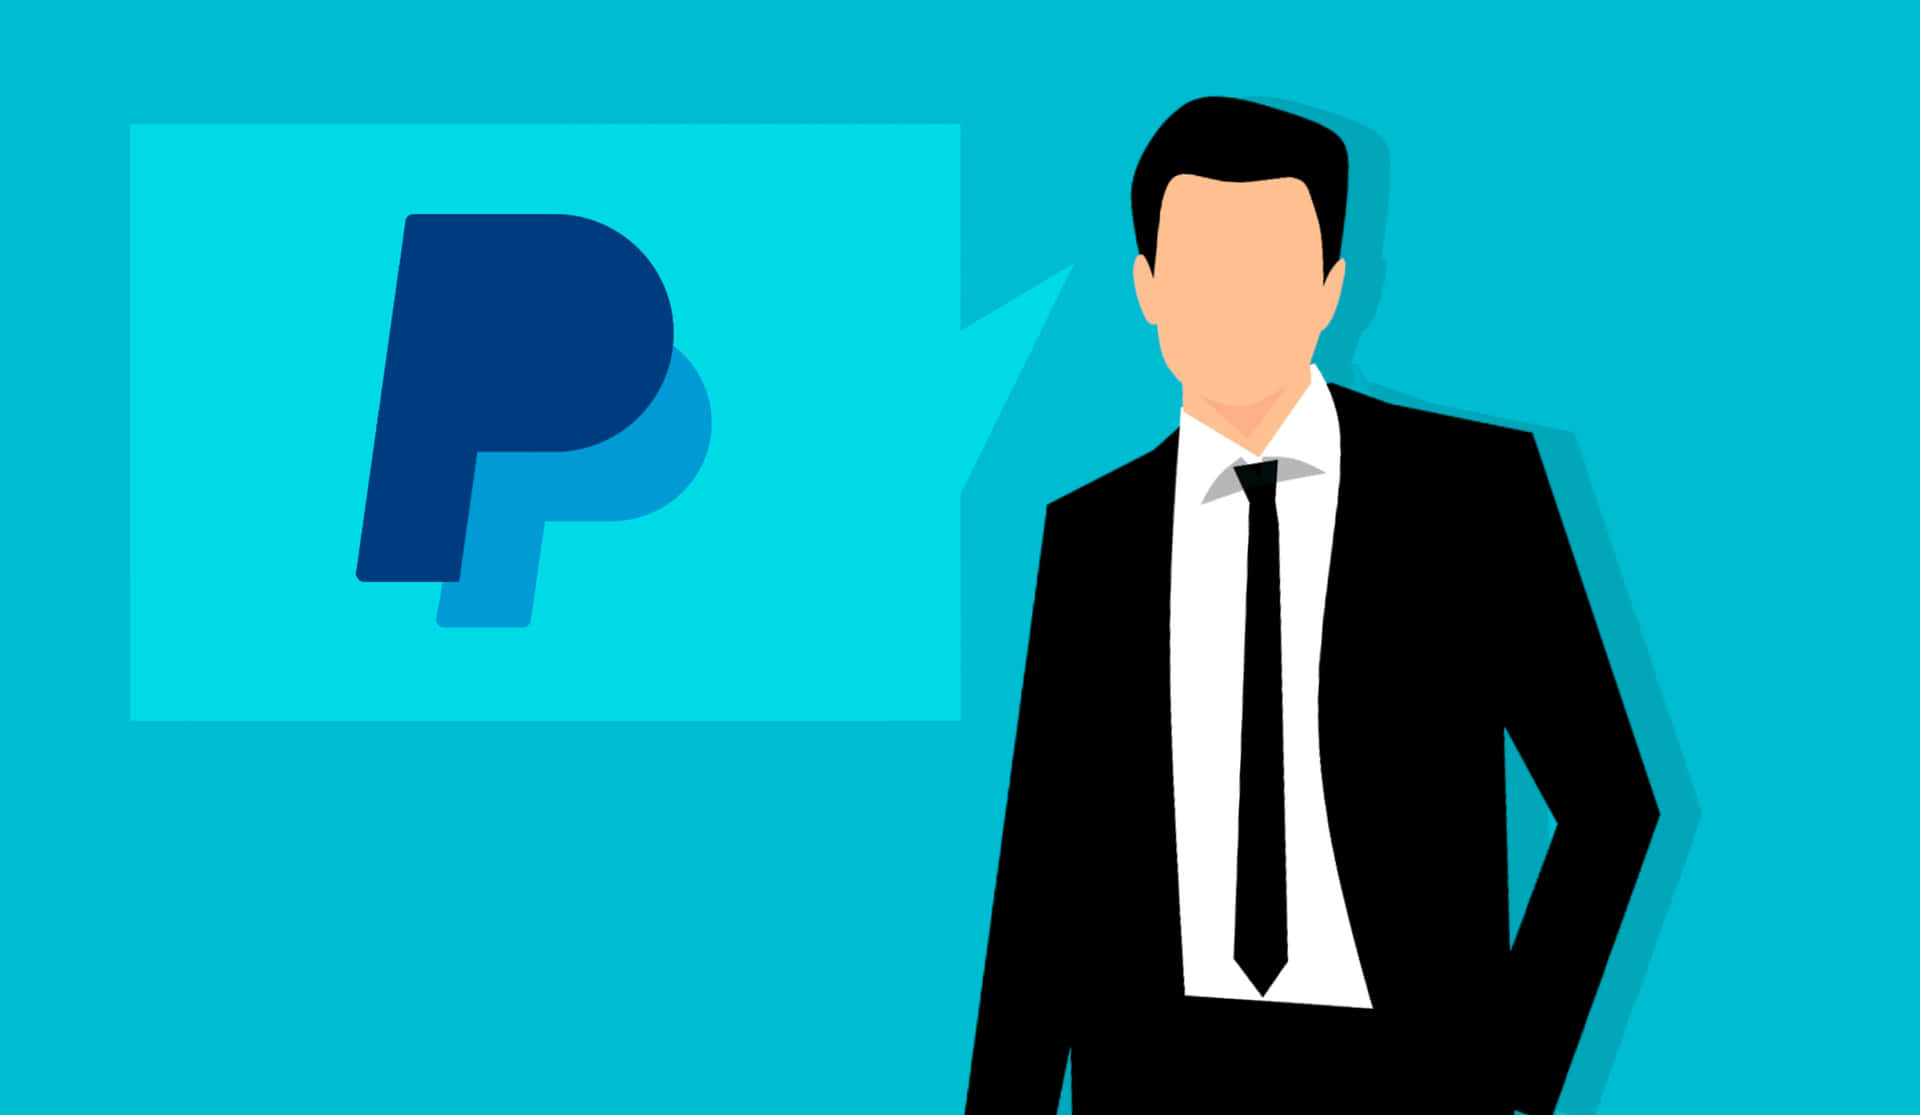 A Man In A Suit And Tie Is Standing Next To A Paypal Logo